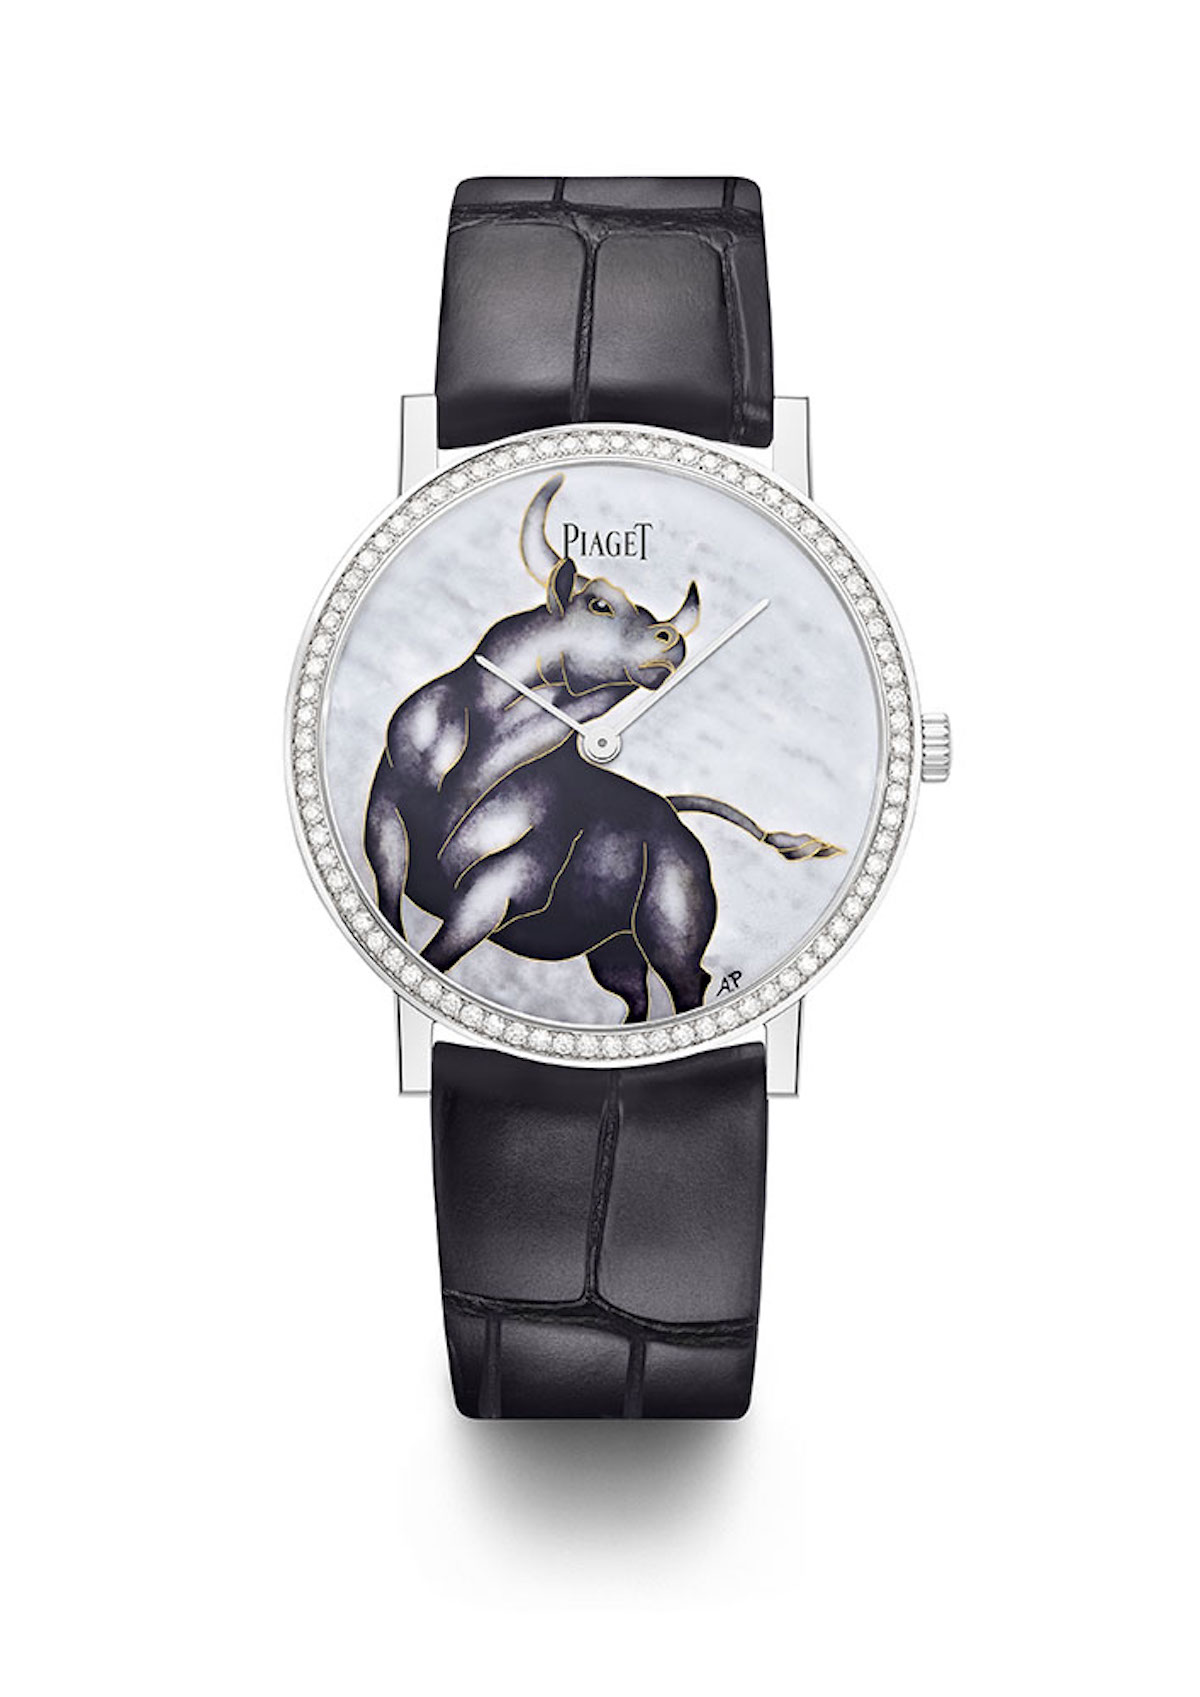 Piaget Altiplano Chinese New Year, Year of the Ox watch.